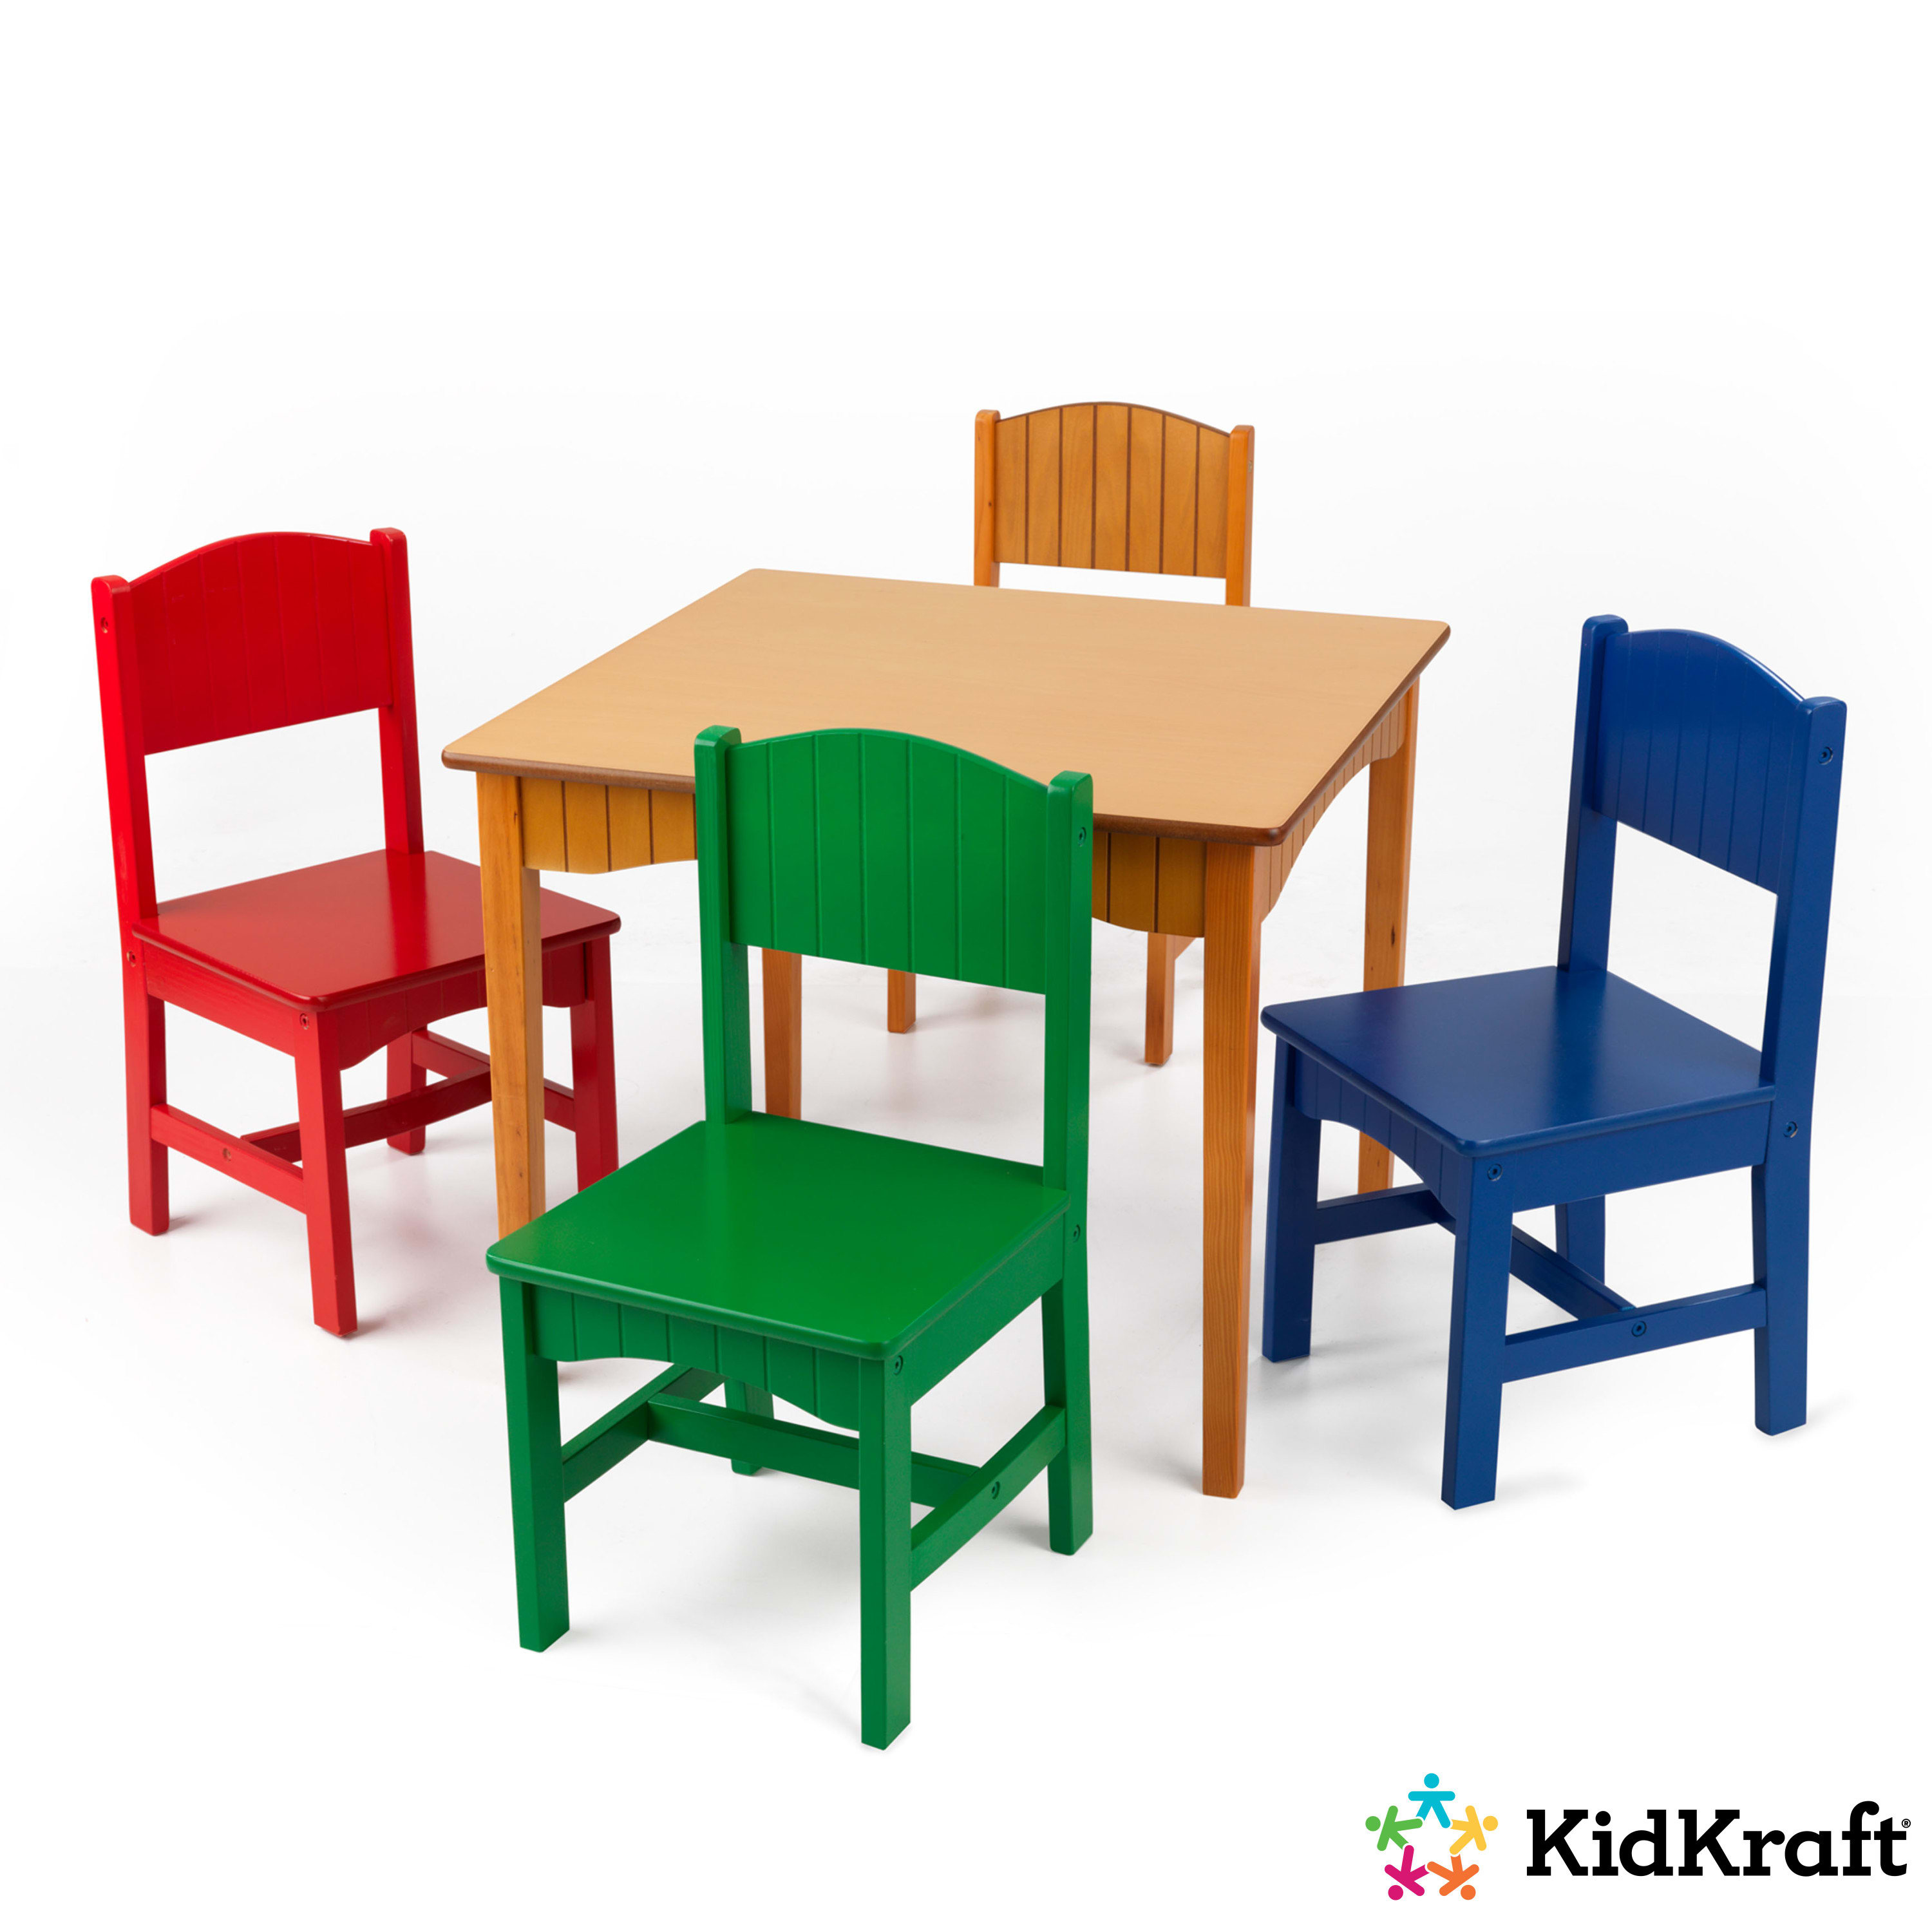 KidKraft Nantucket Wooden Table & 4 Chair Set, Primary Colors - image 5 of 7